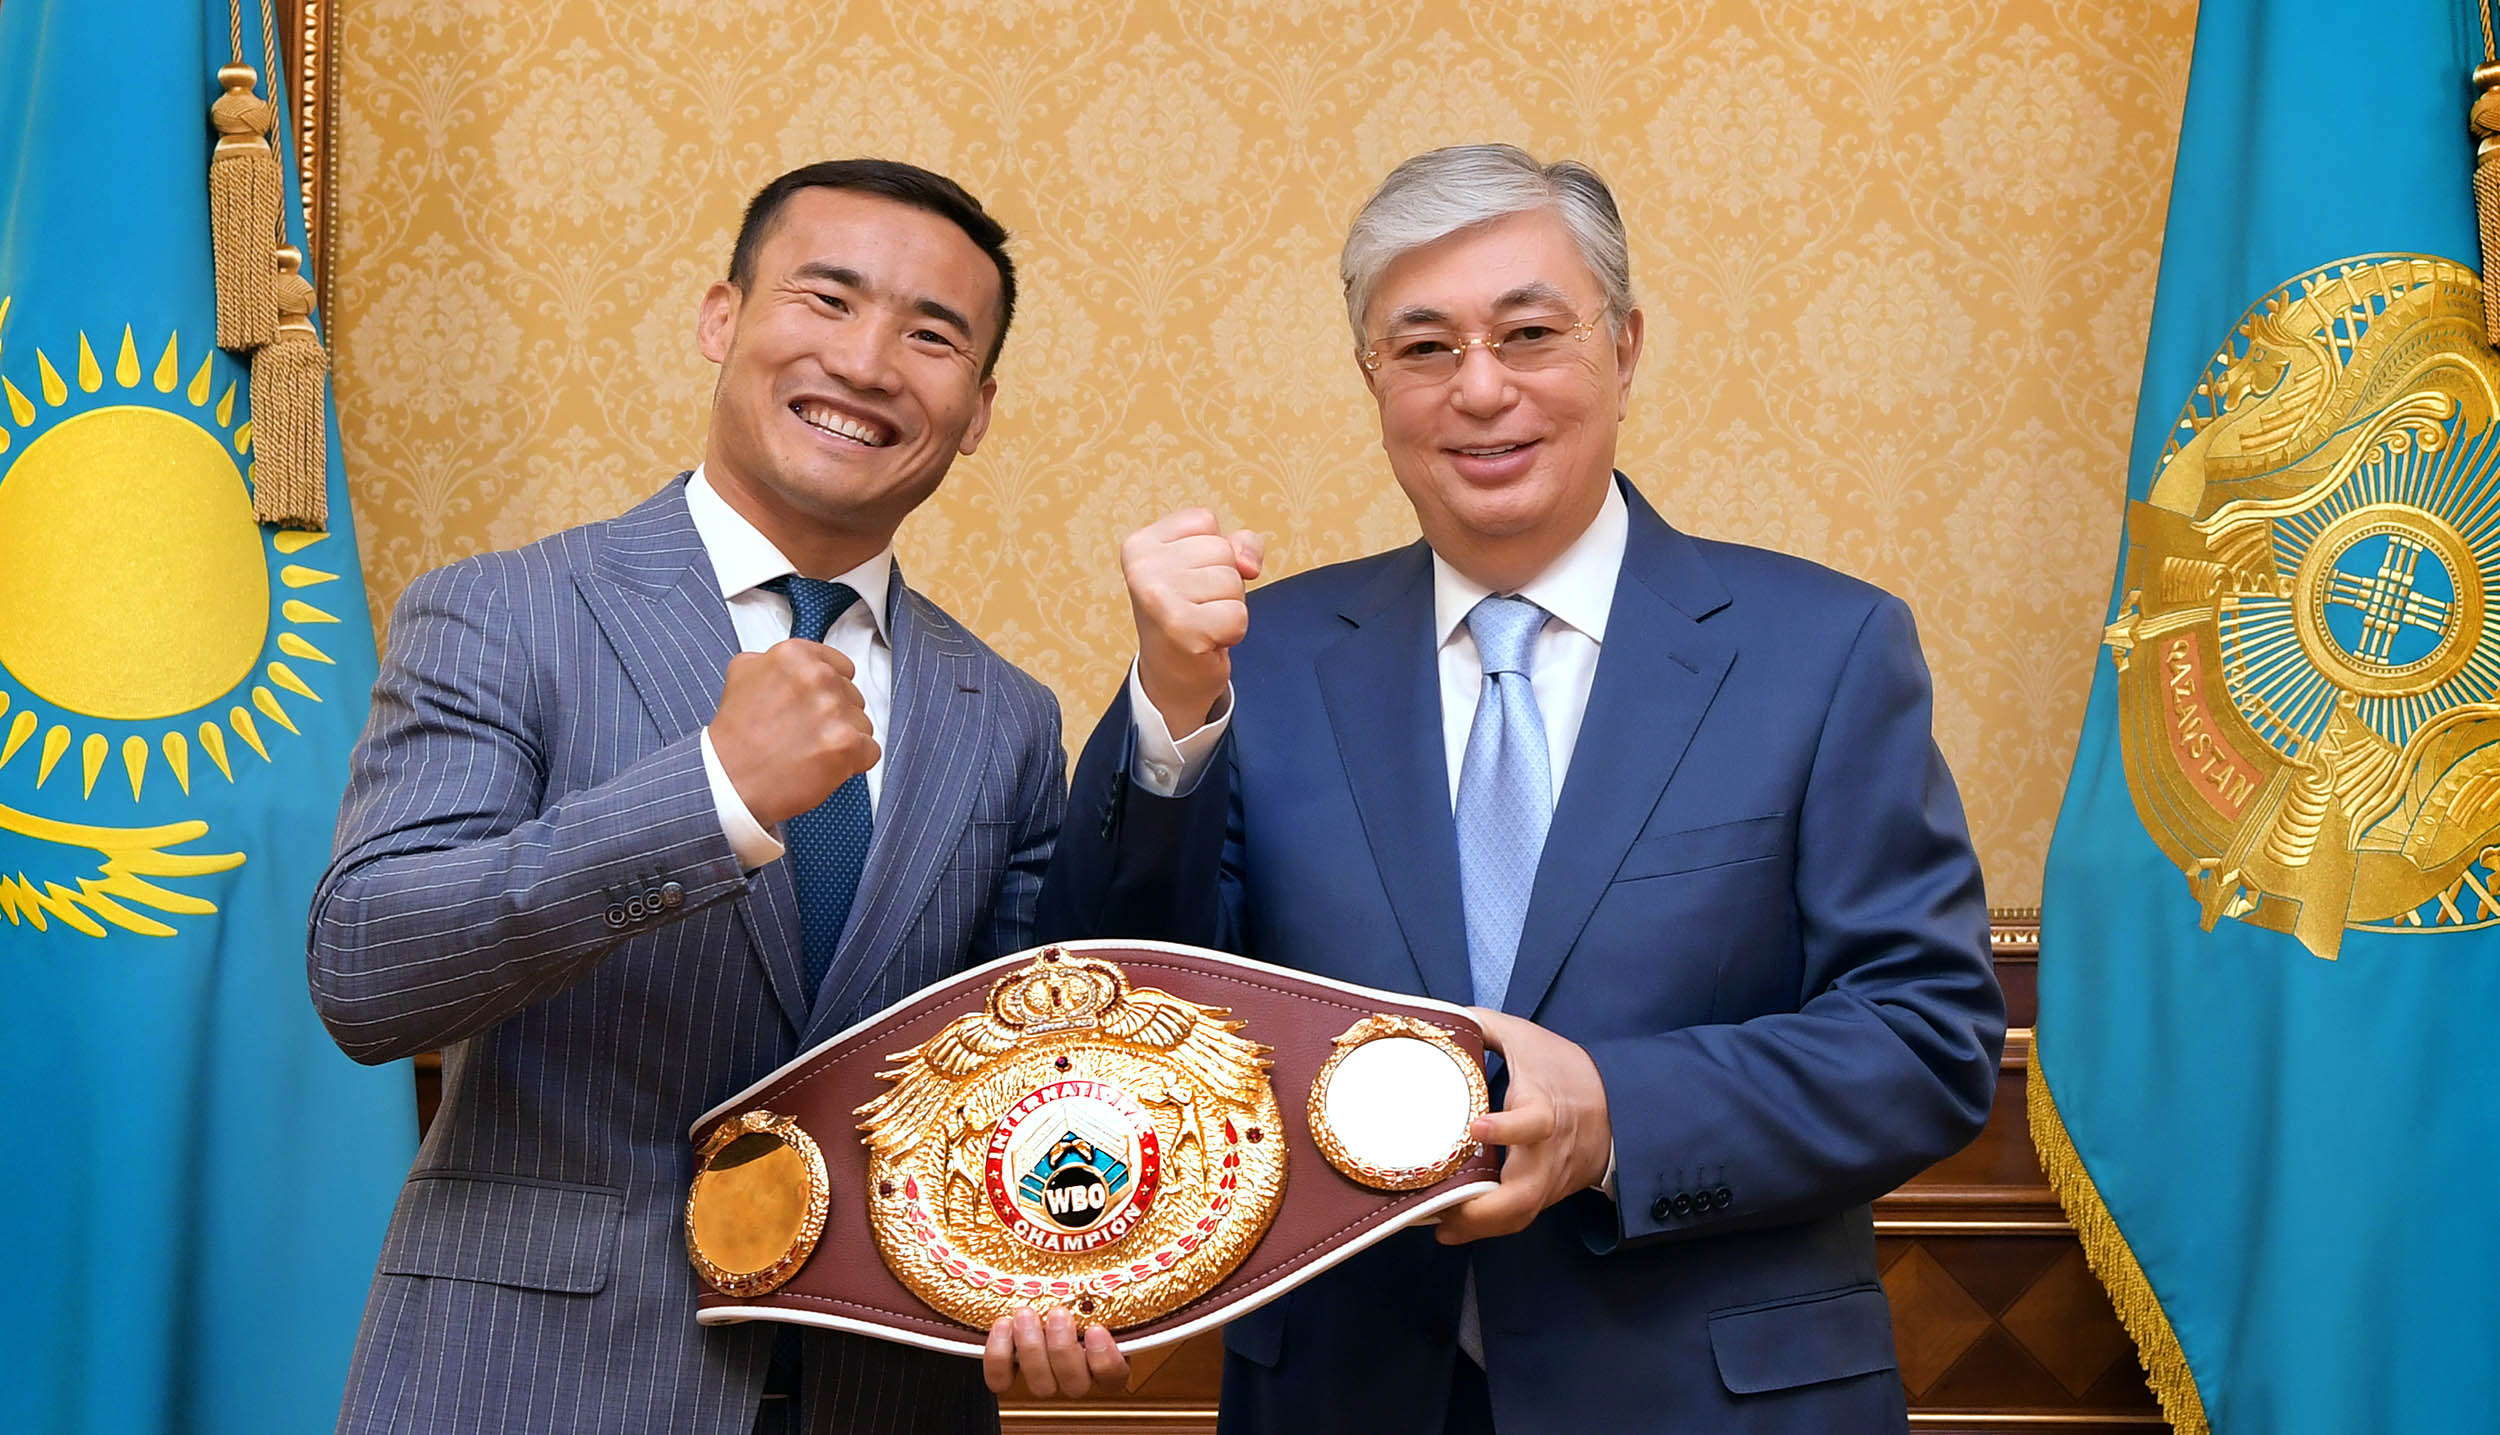 The Head of State receives Kanat Islam, professional boxer